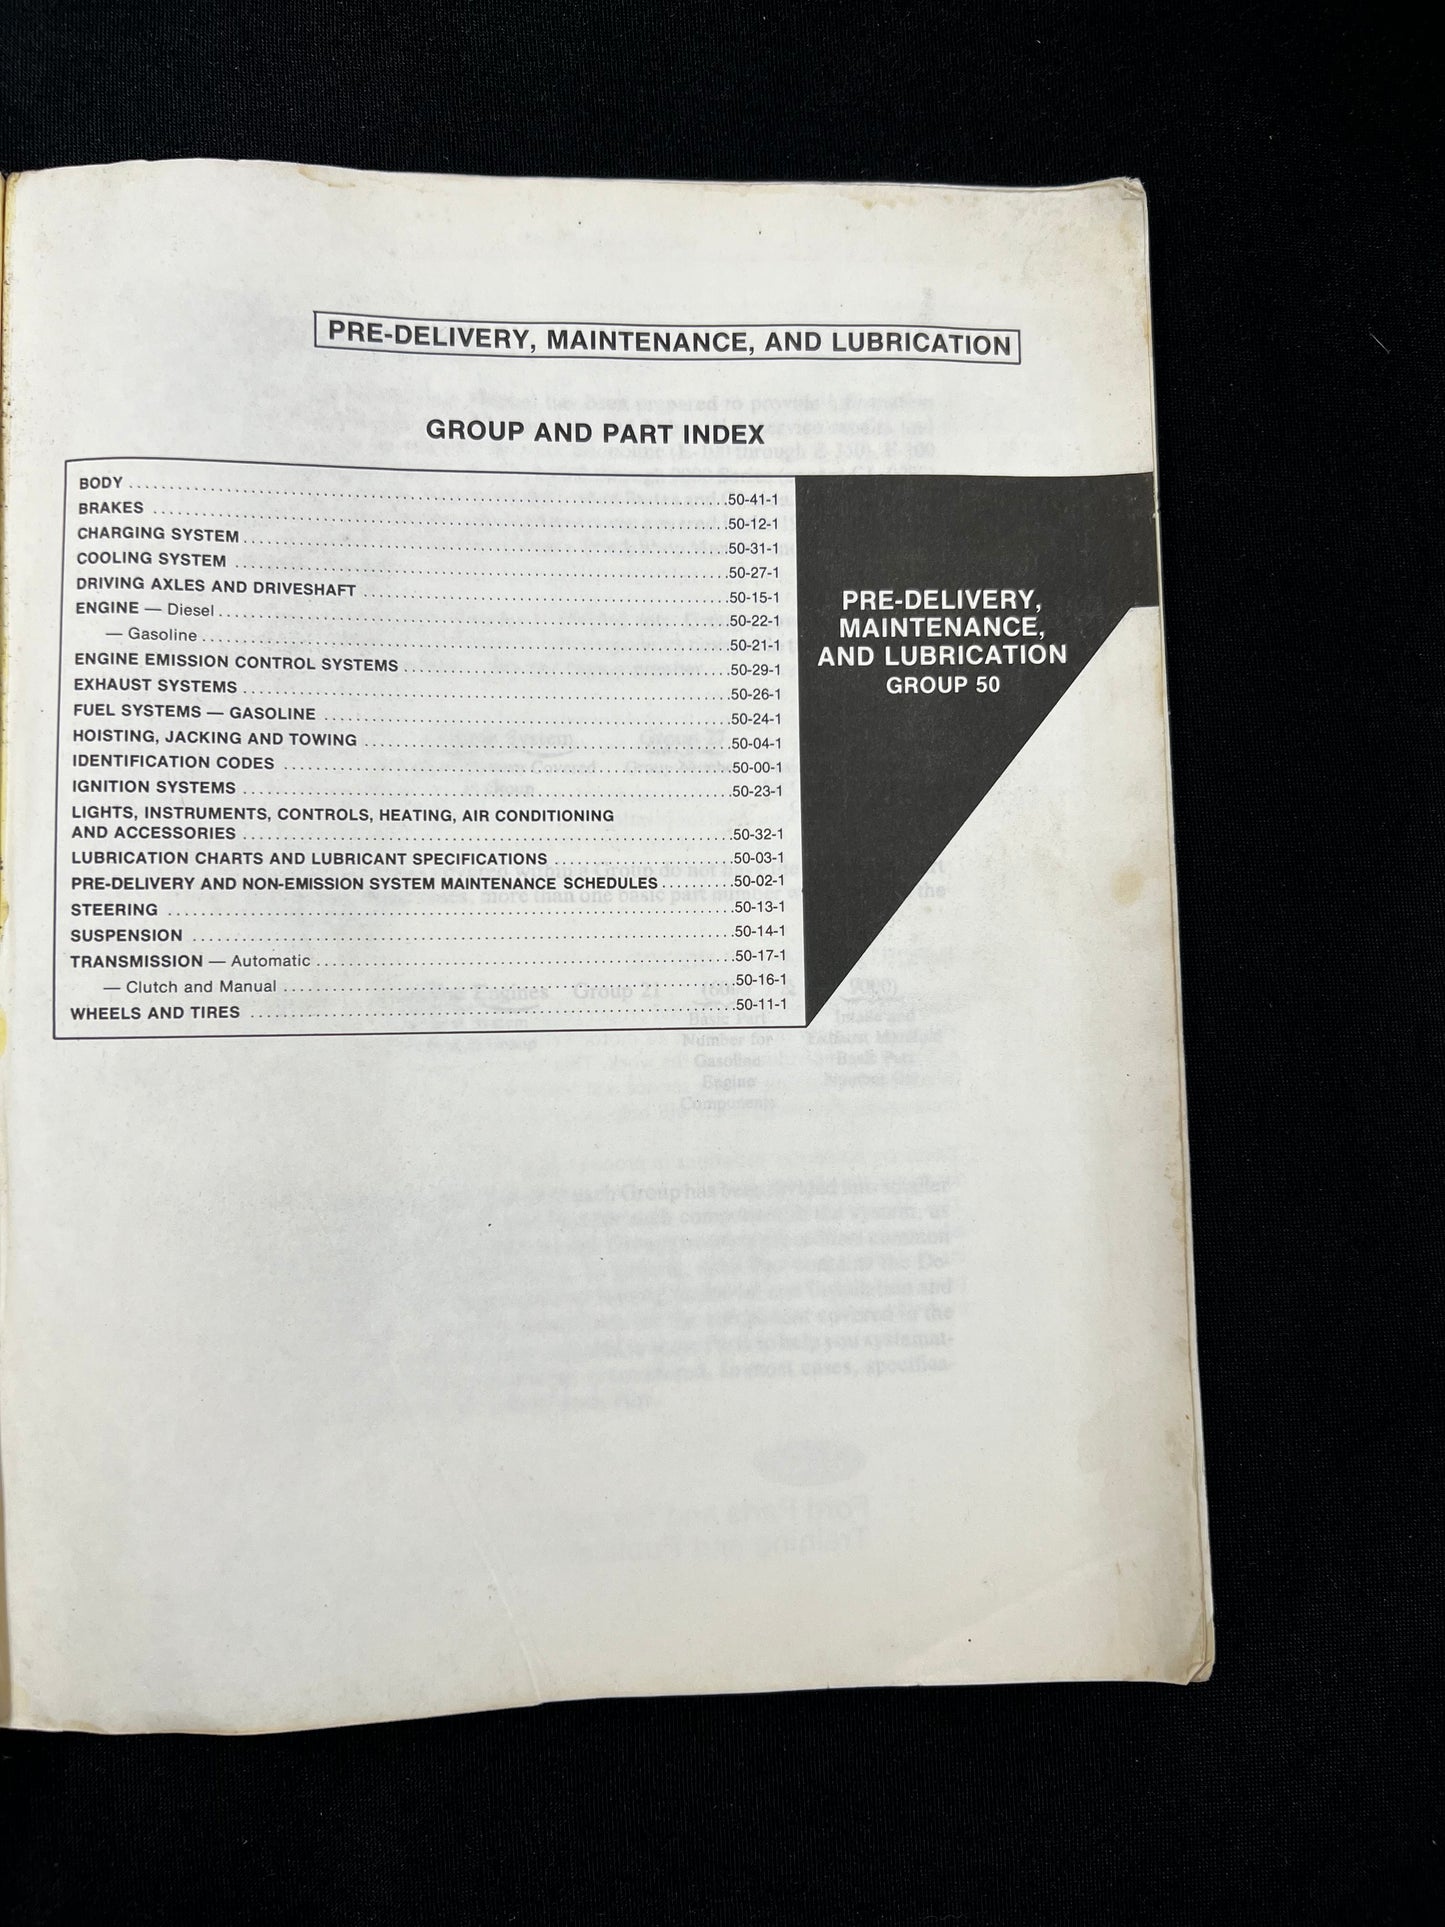 1979 Truck Shop Manual  Pre-Delivery, Maintenance & Lubrication